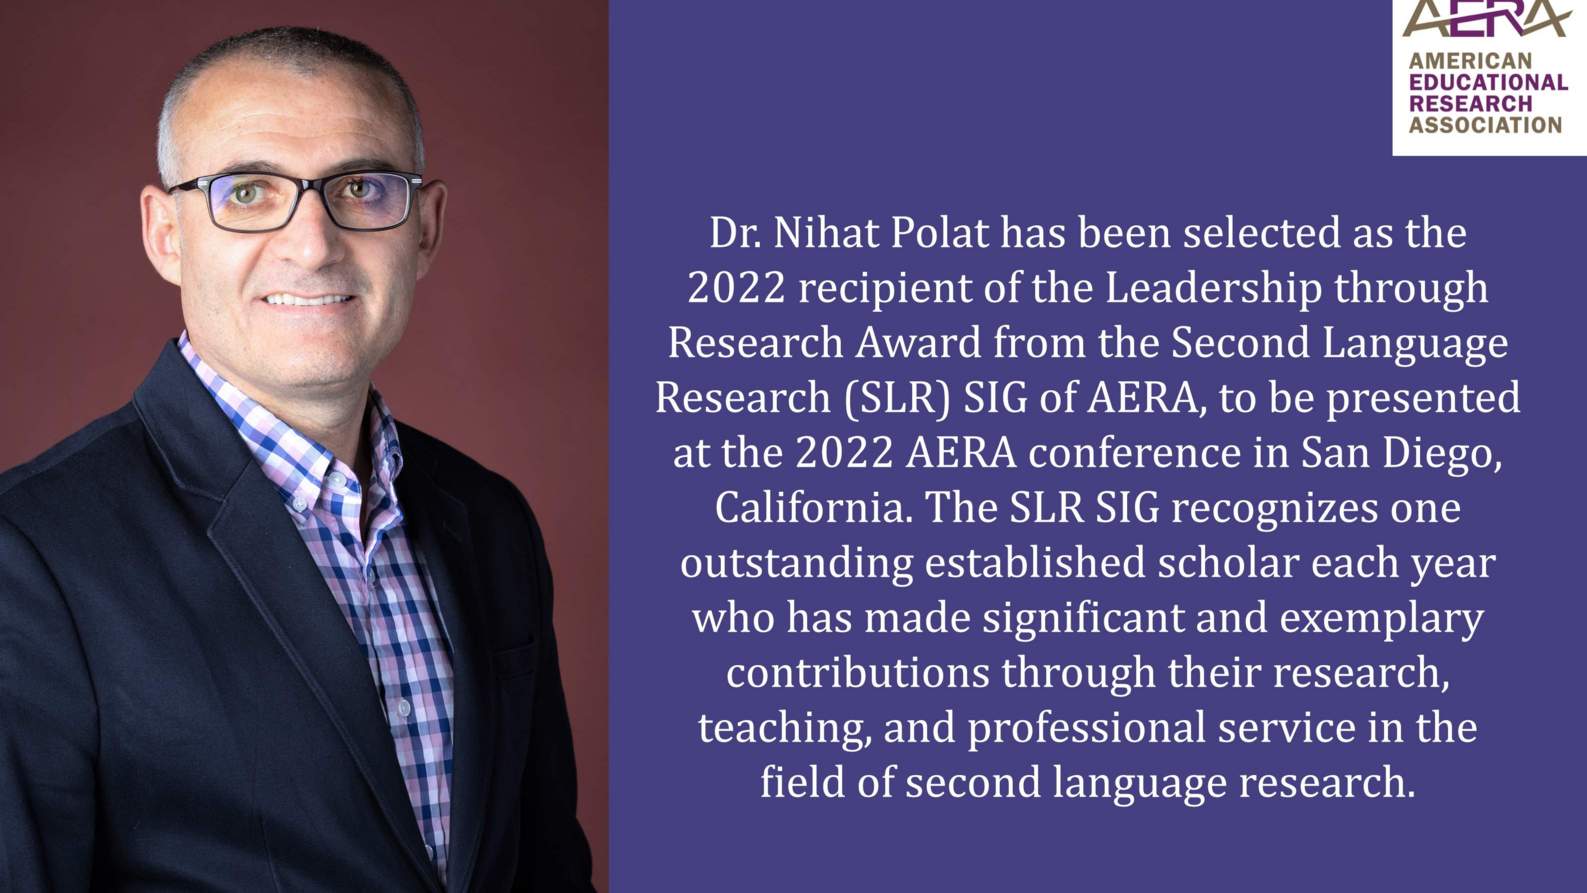 Dr. Nihat Polat has been selected as the 2022 recipient of the Leadership through Research Award from the Second Language Research (SLR) SIG of AERA, to be presented at the 2022 AERA conference in San Diego, California. The SLR SIG recognizes one outstanding established scholar each year who has made significant and exemplary contributions through their research, teaching, and professional service in the field of second language research.